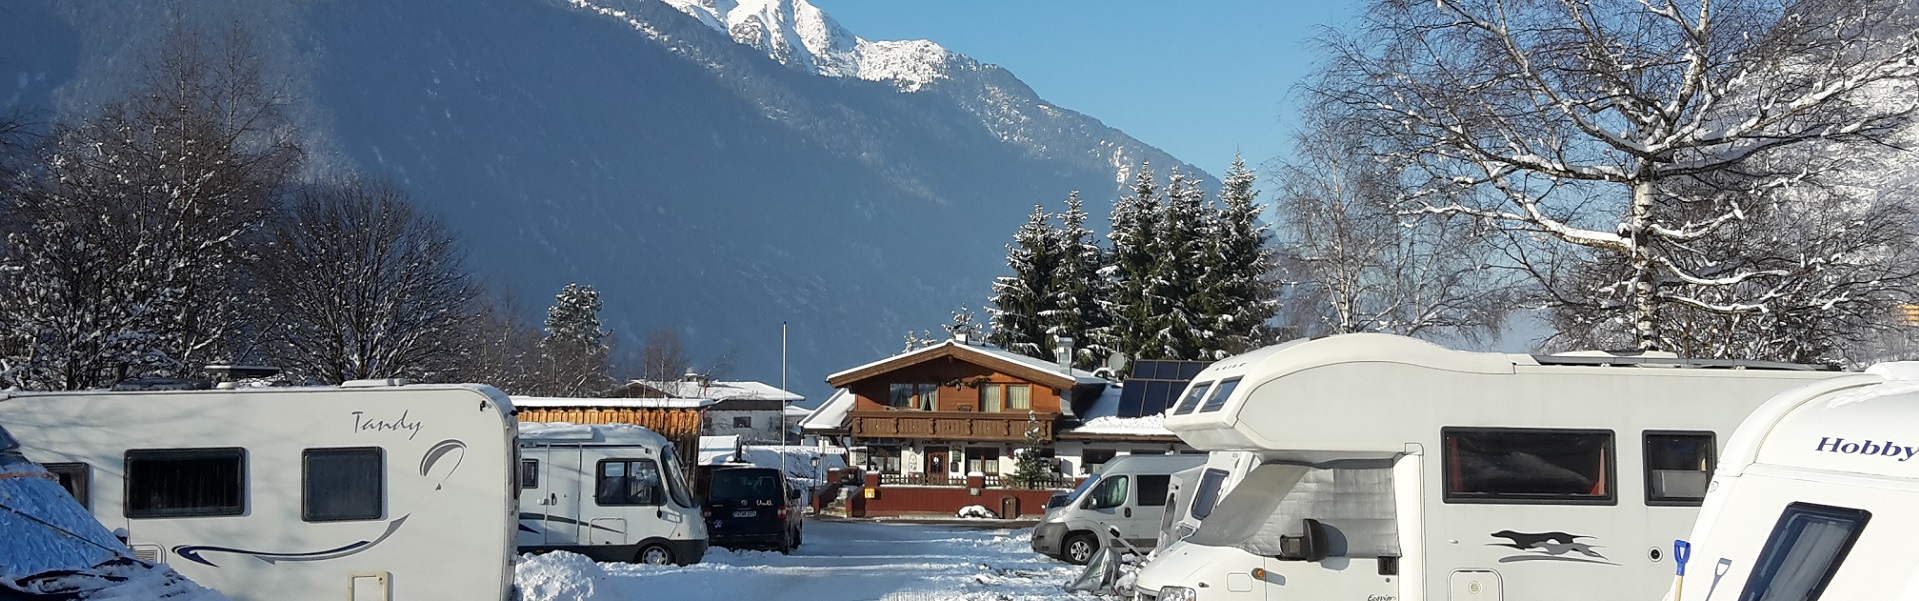 Camping Oetztal Winter